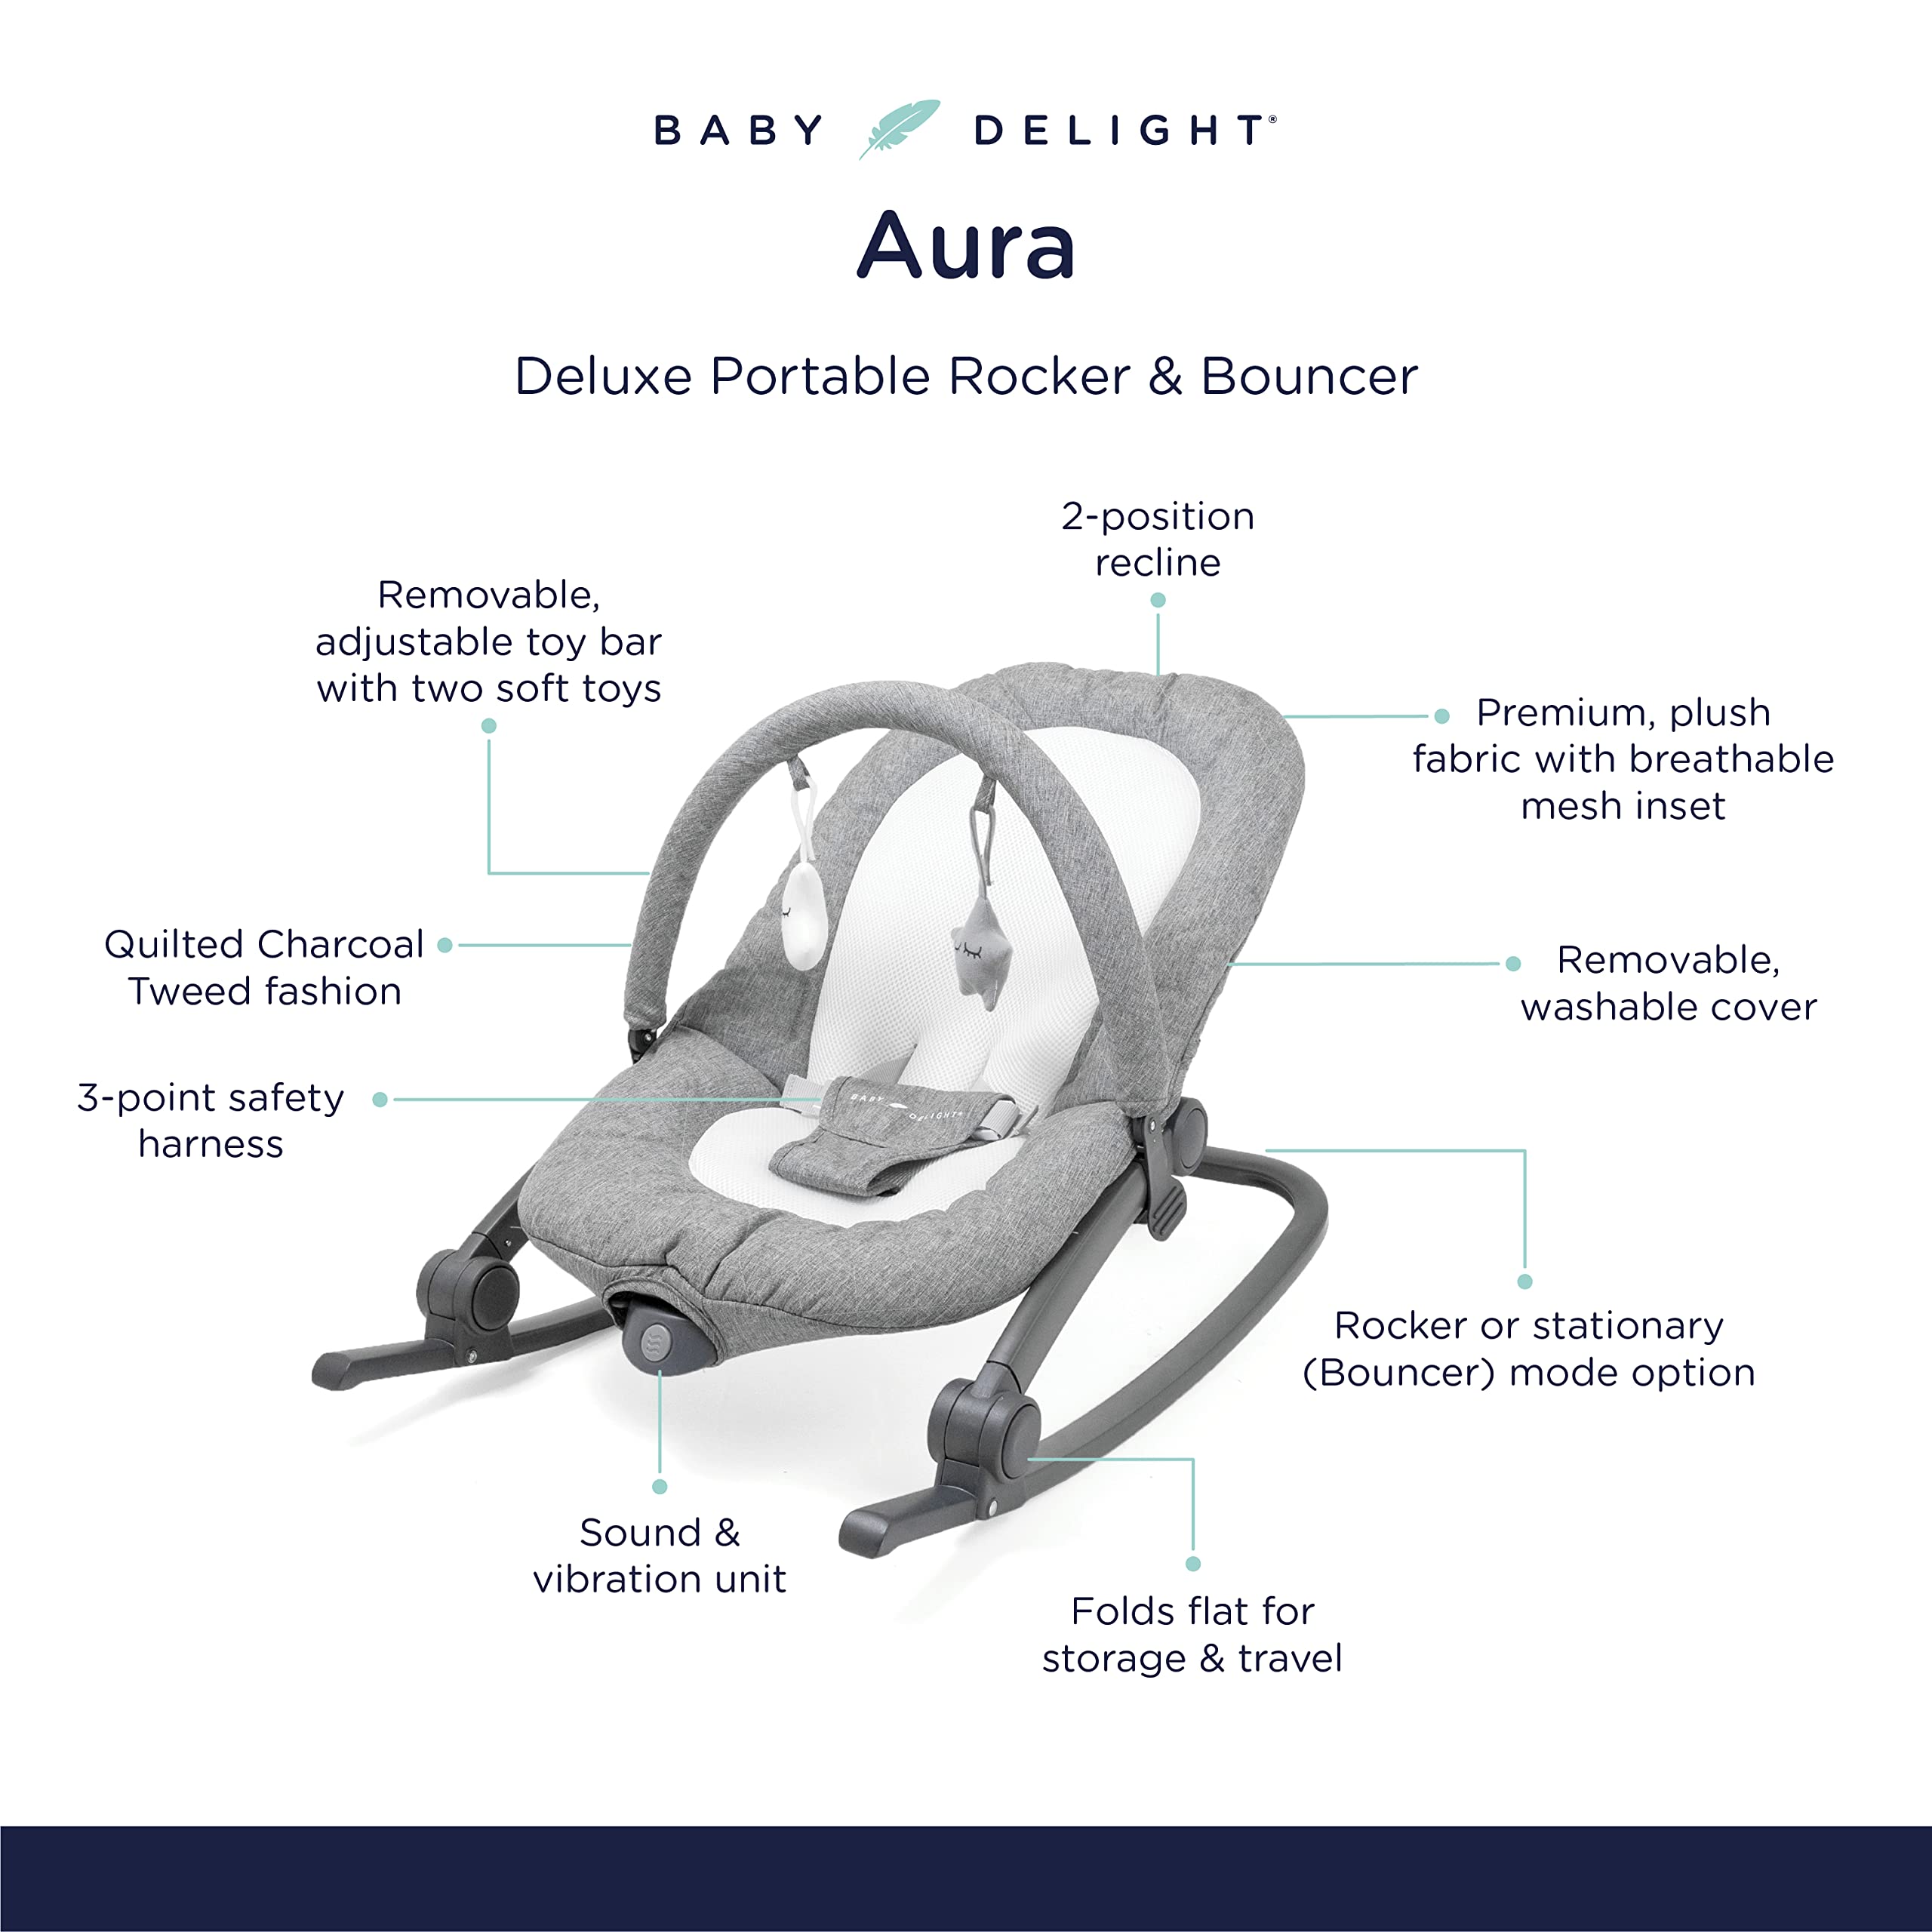 Baby Delight Aura Deluxe | Portable Baby Bouncer for Infants | Baby Rocker | Quilted Charcoal Tweed